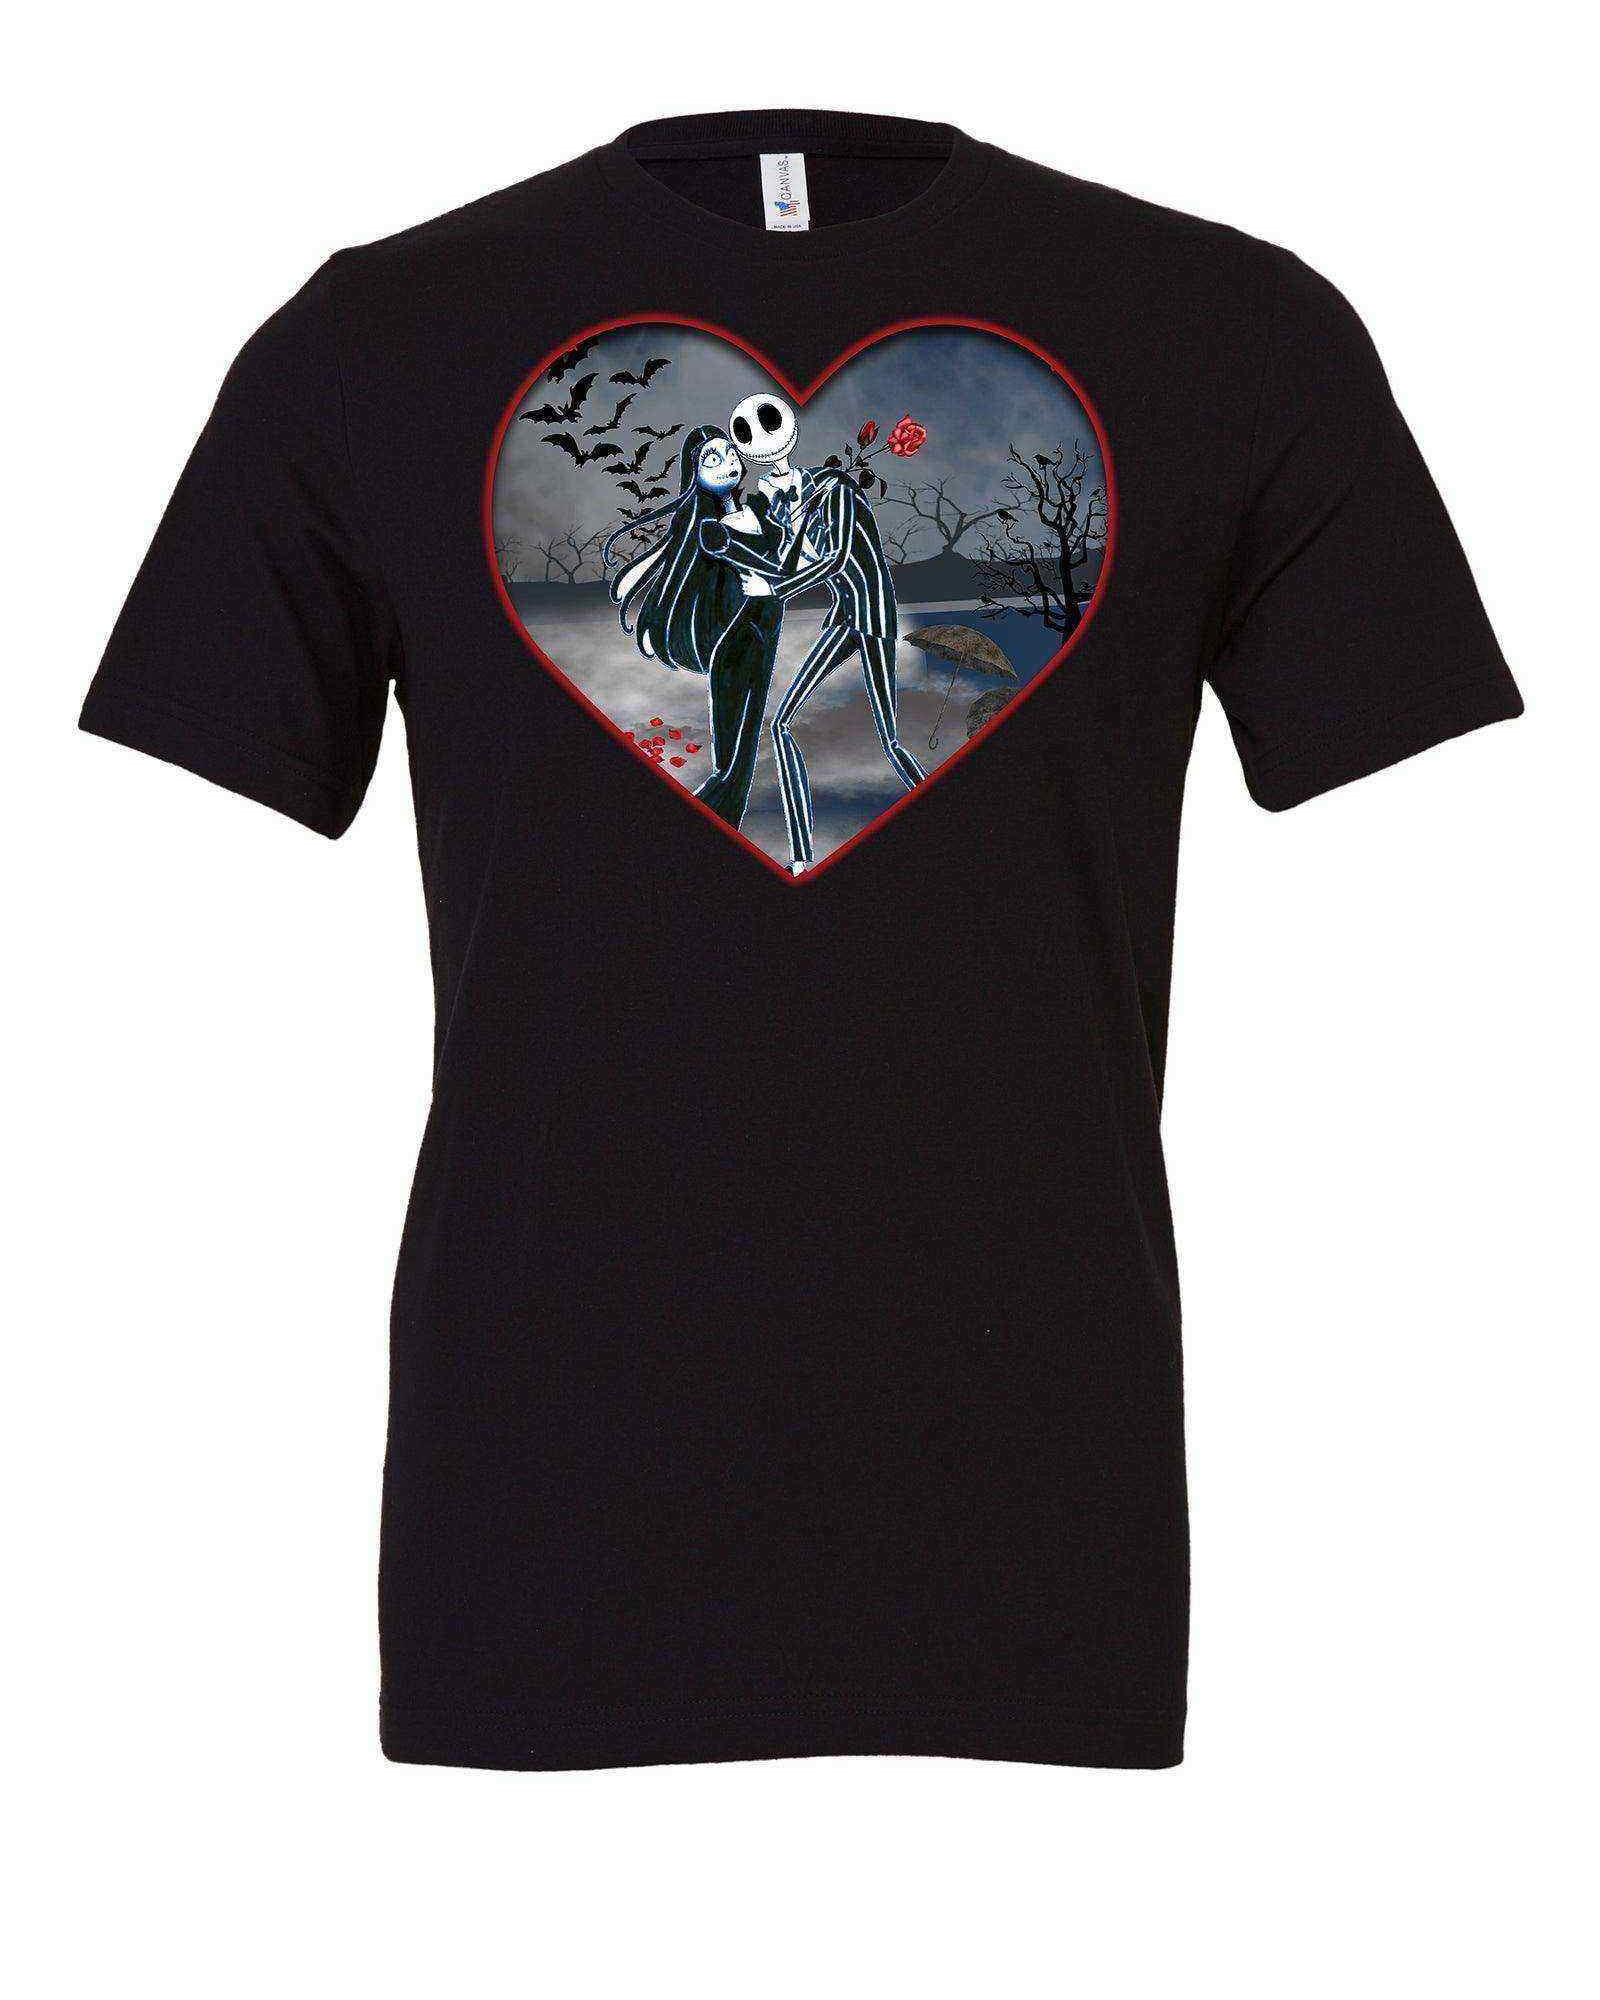 Womens | The Skellington Family Shirt | Addams Valentines Day Shirt | Jack And Sally Shirt - Dylan's Tees